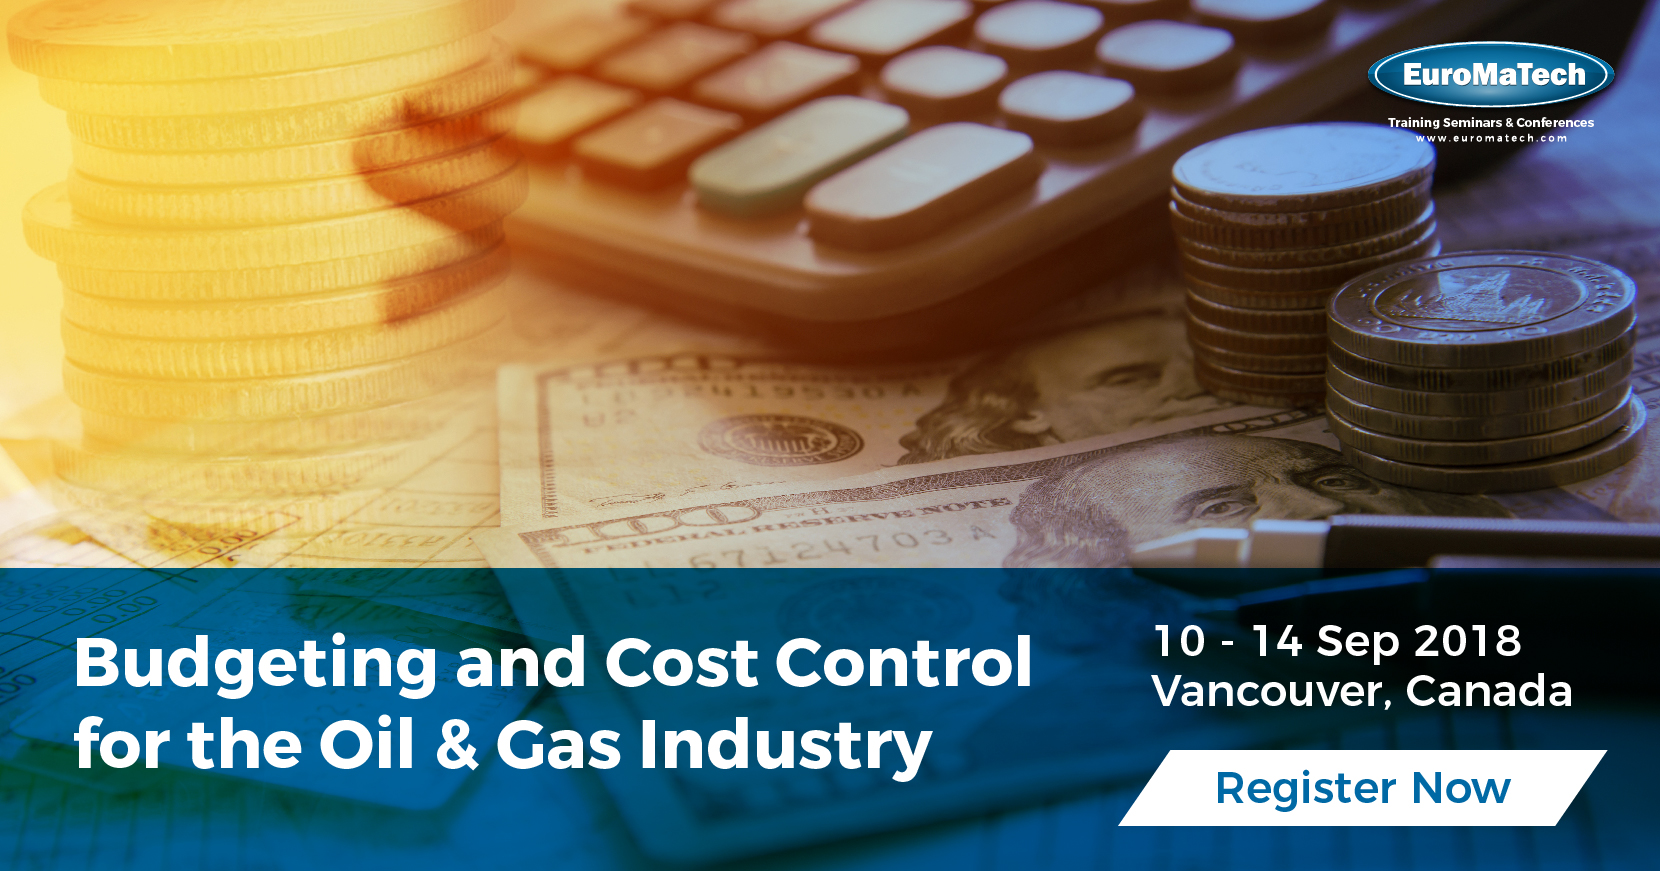 Budgeting and Cost Control for the Oil & Gas Industry Training Course